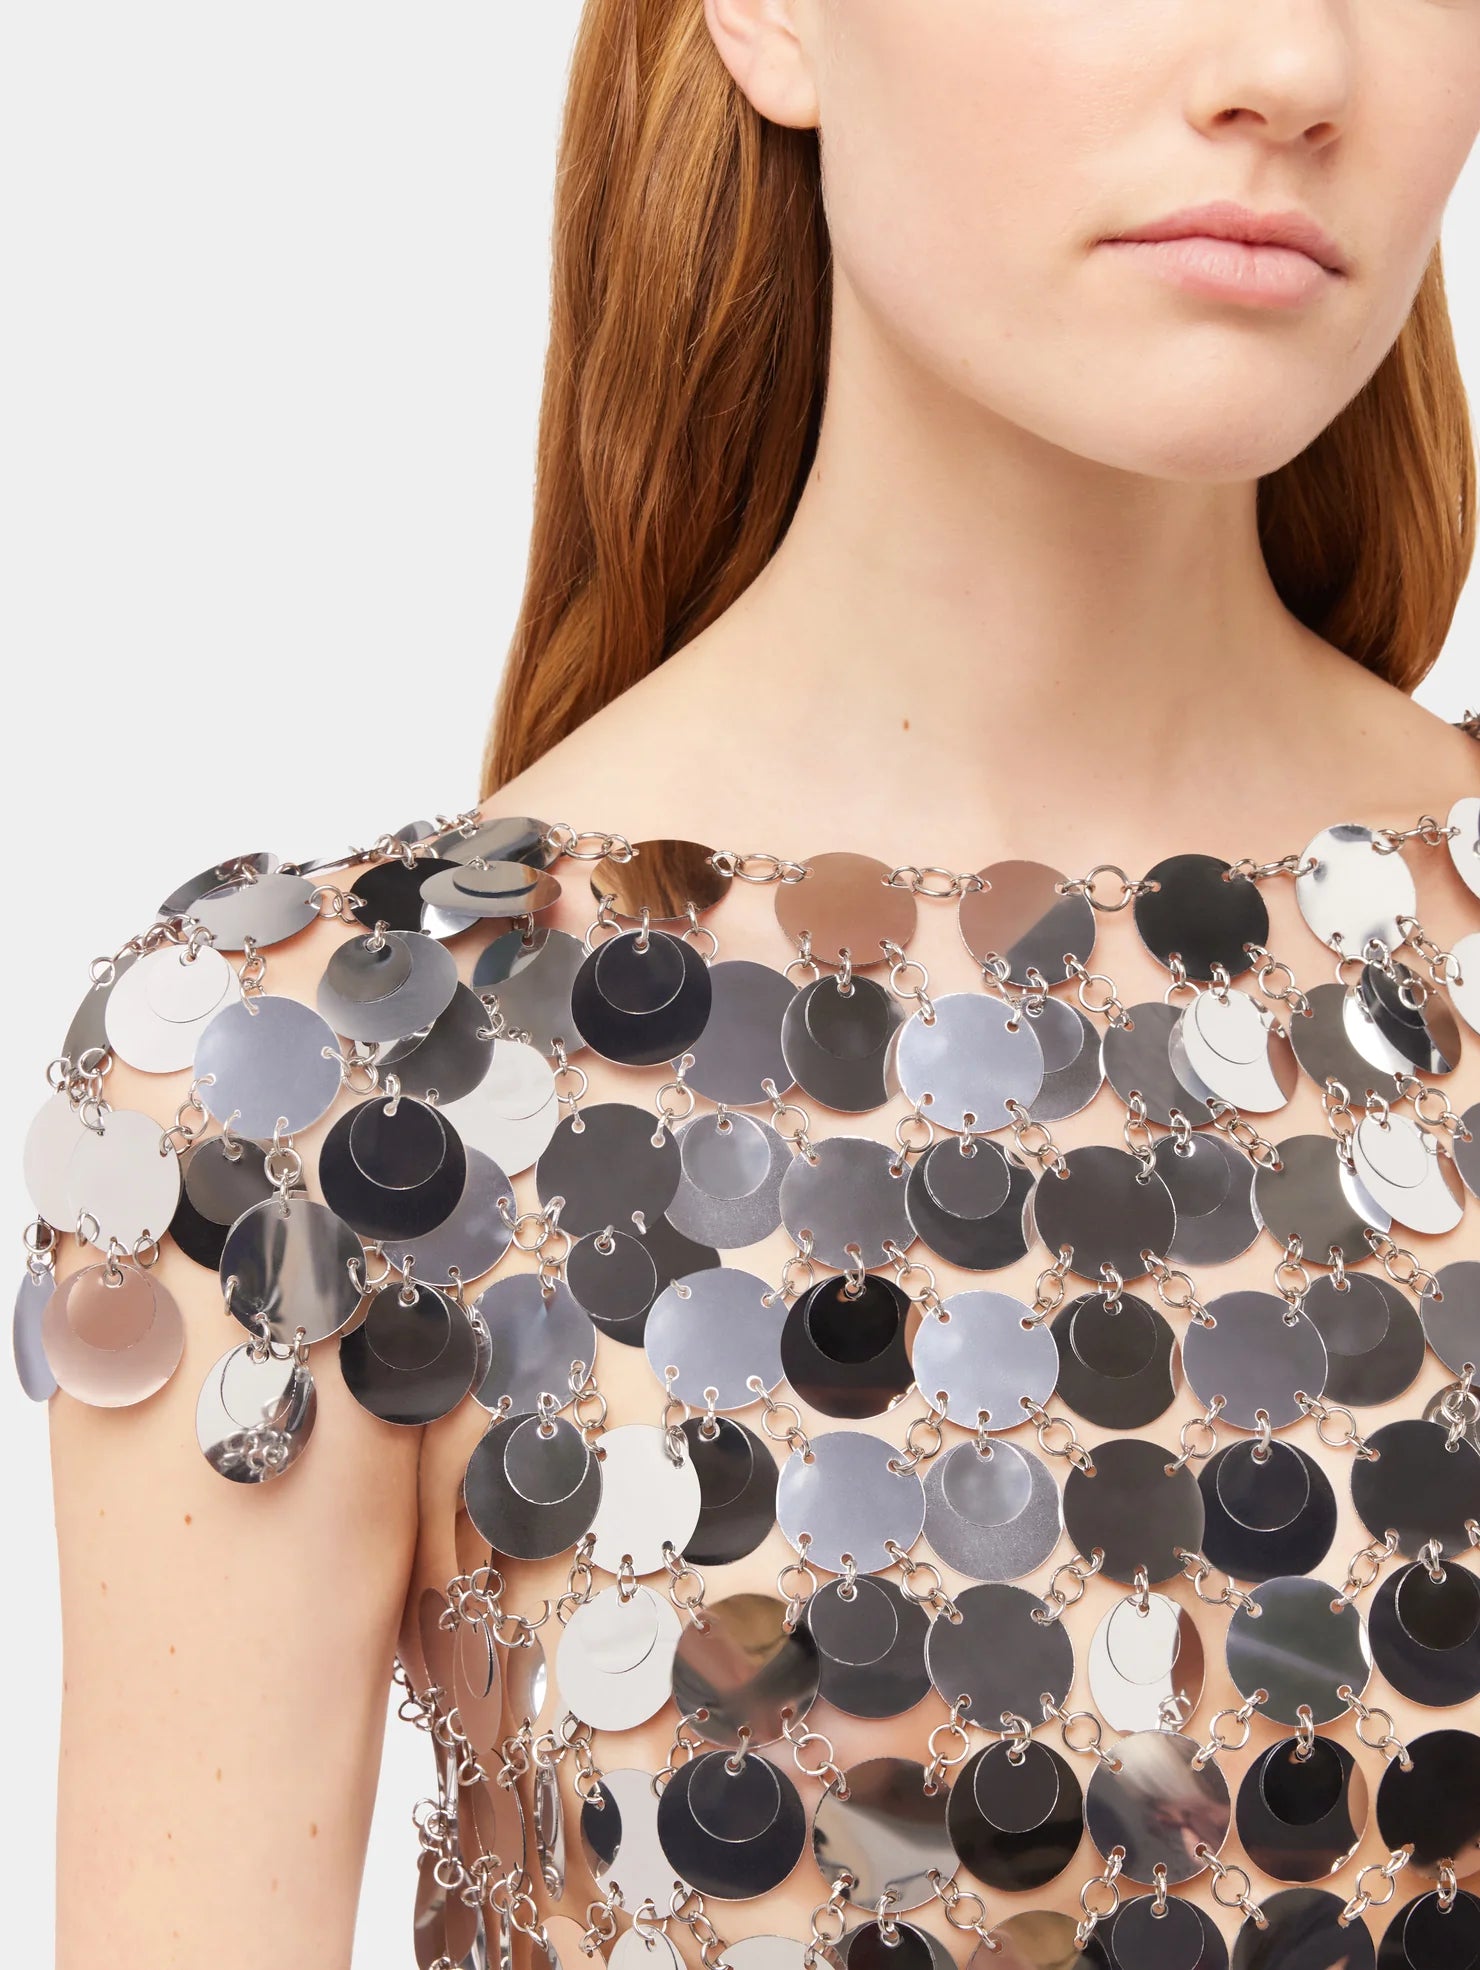 The iconic Silver sparkle discs dress